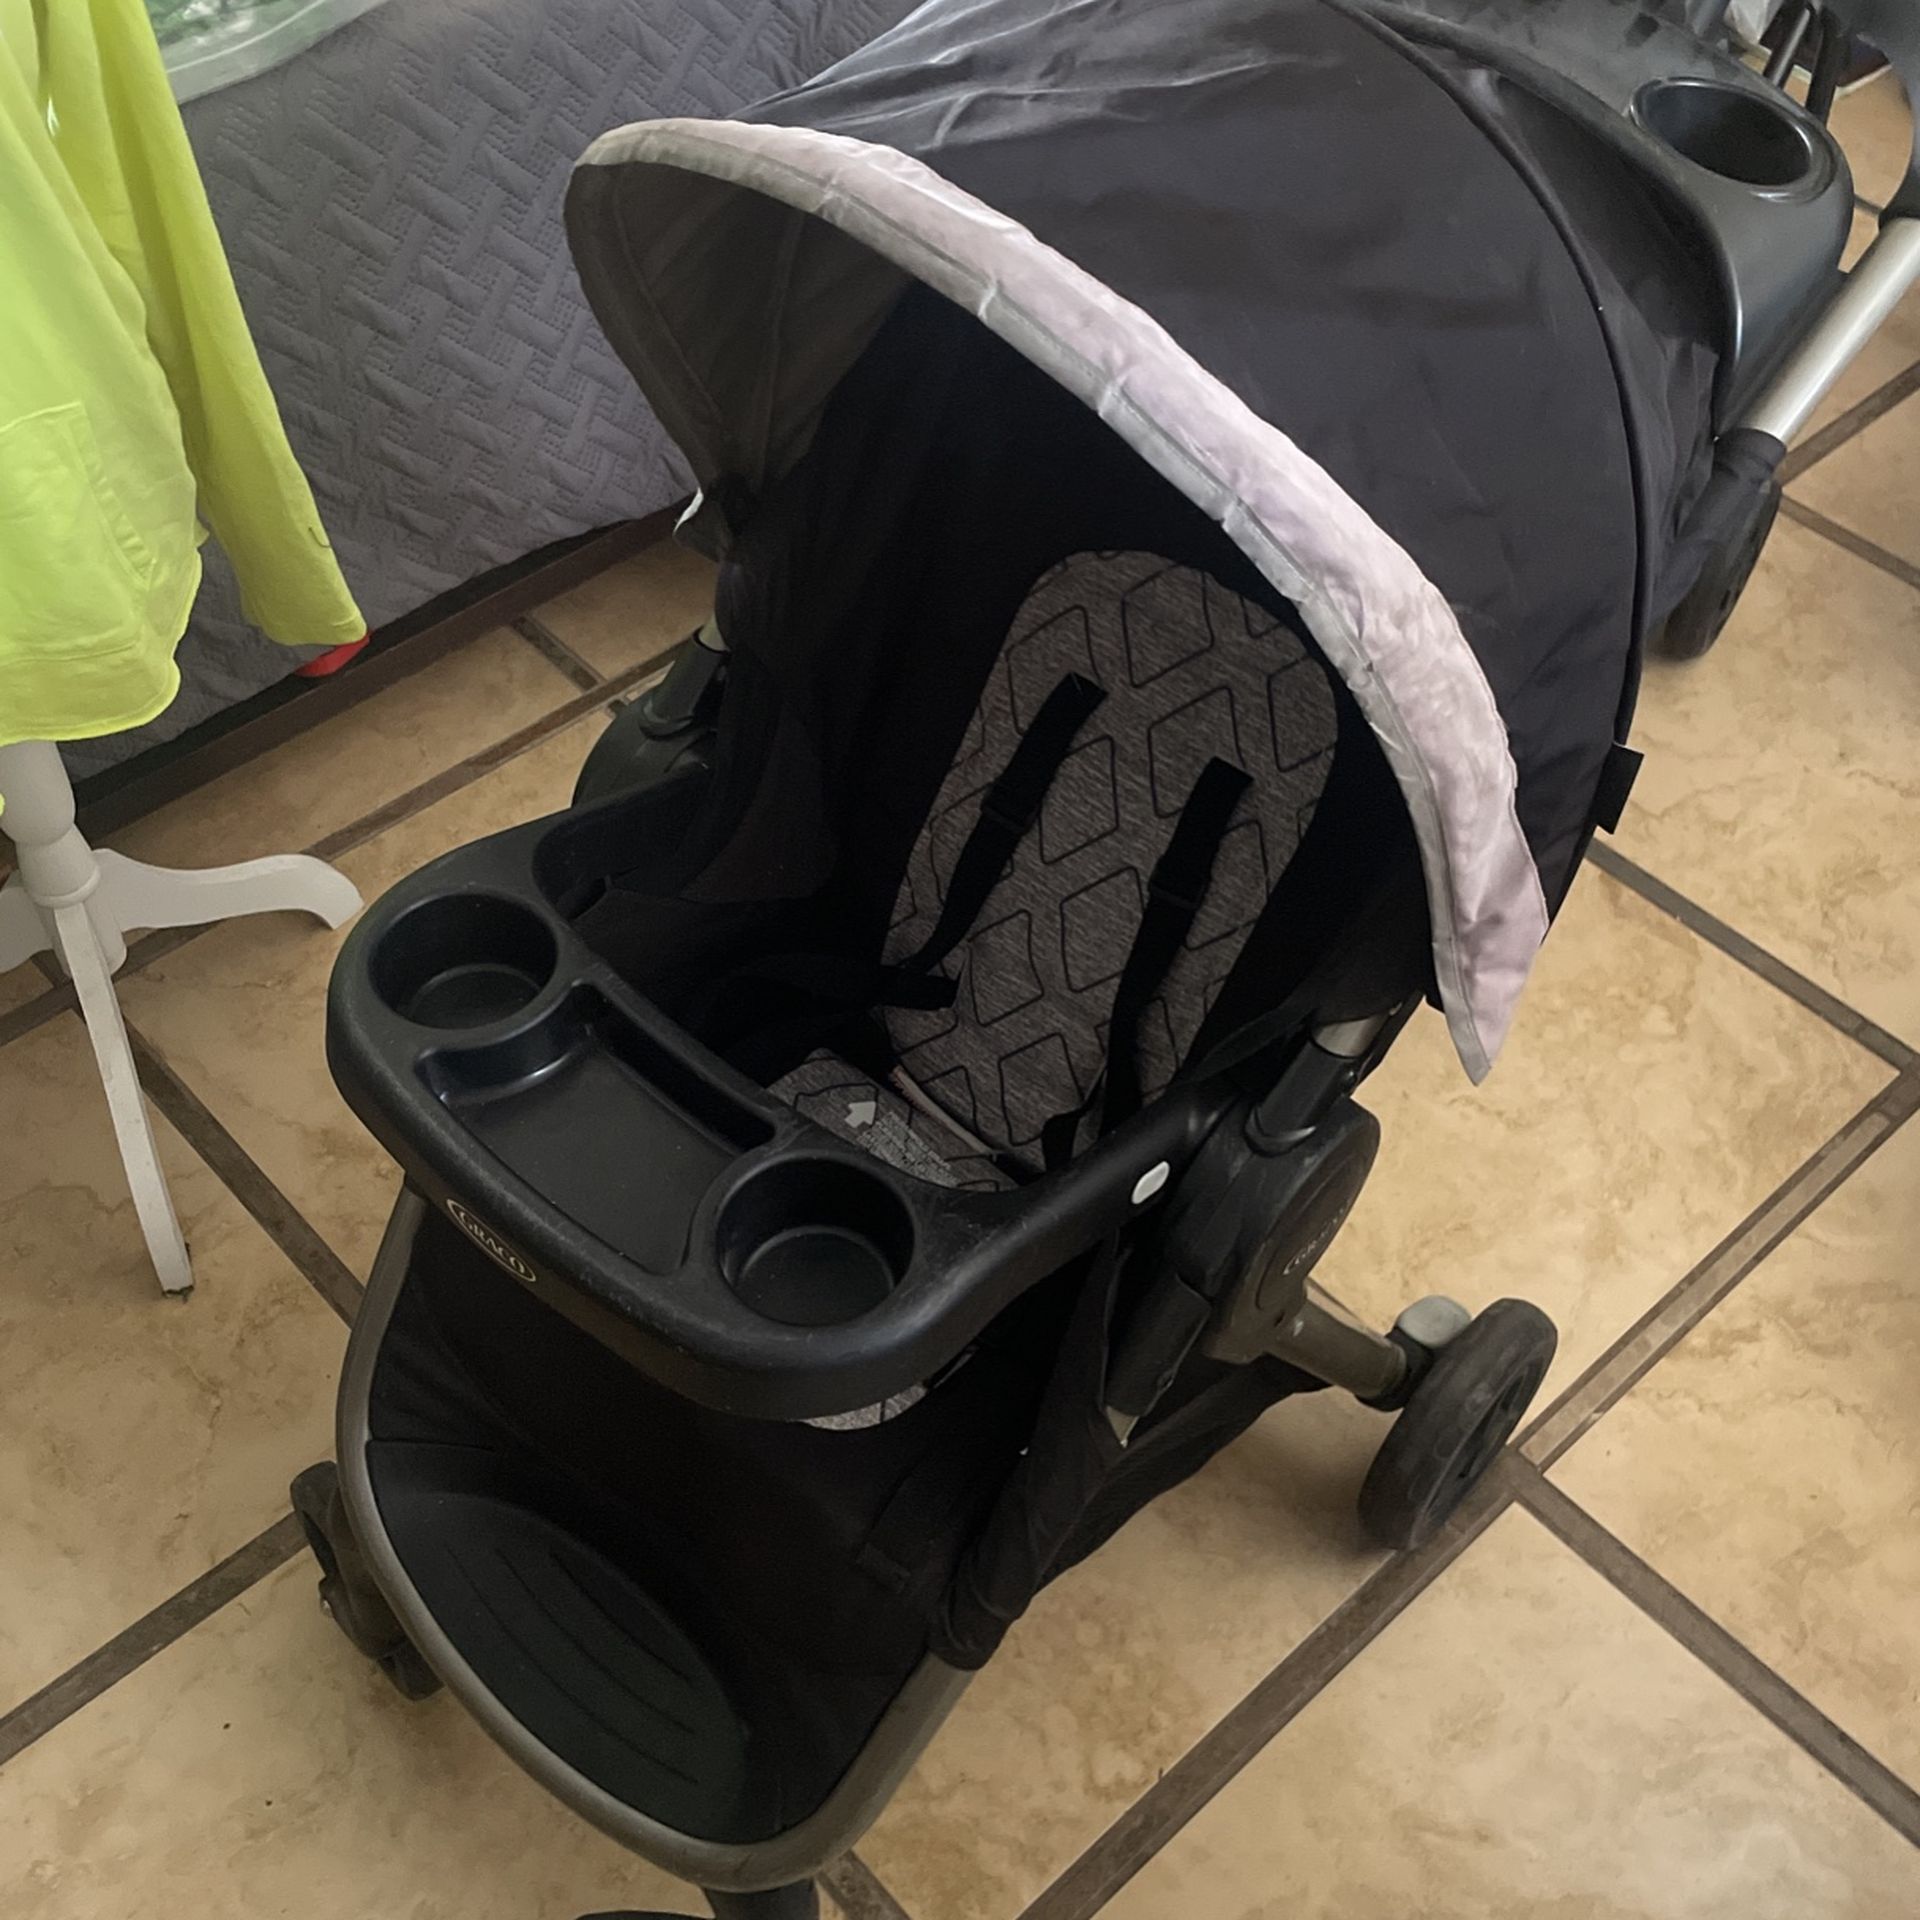 Graco Stoller with car mount seat